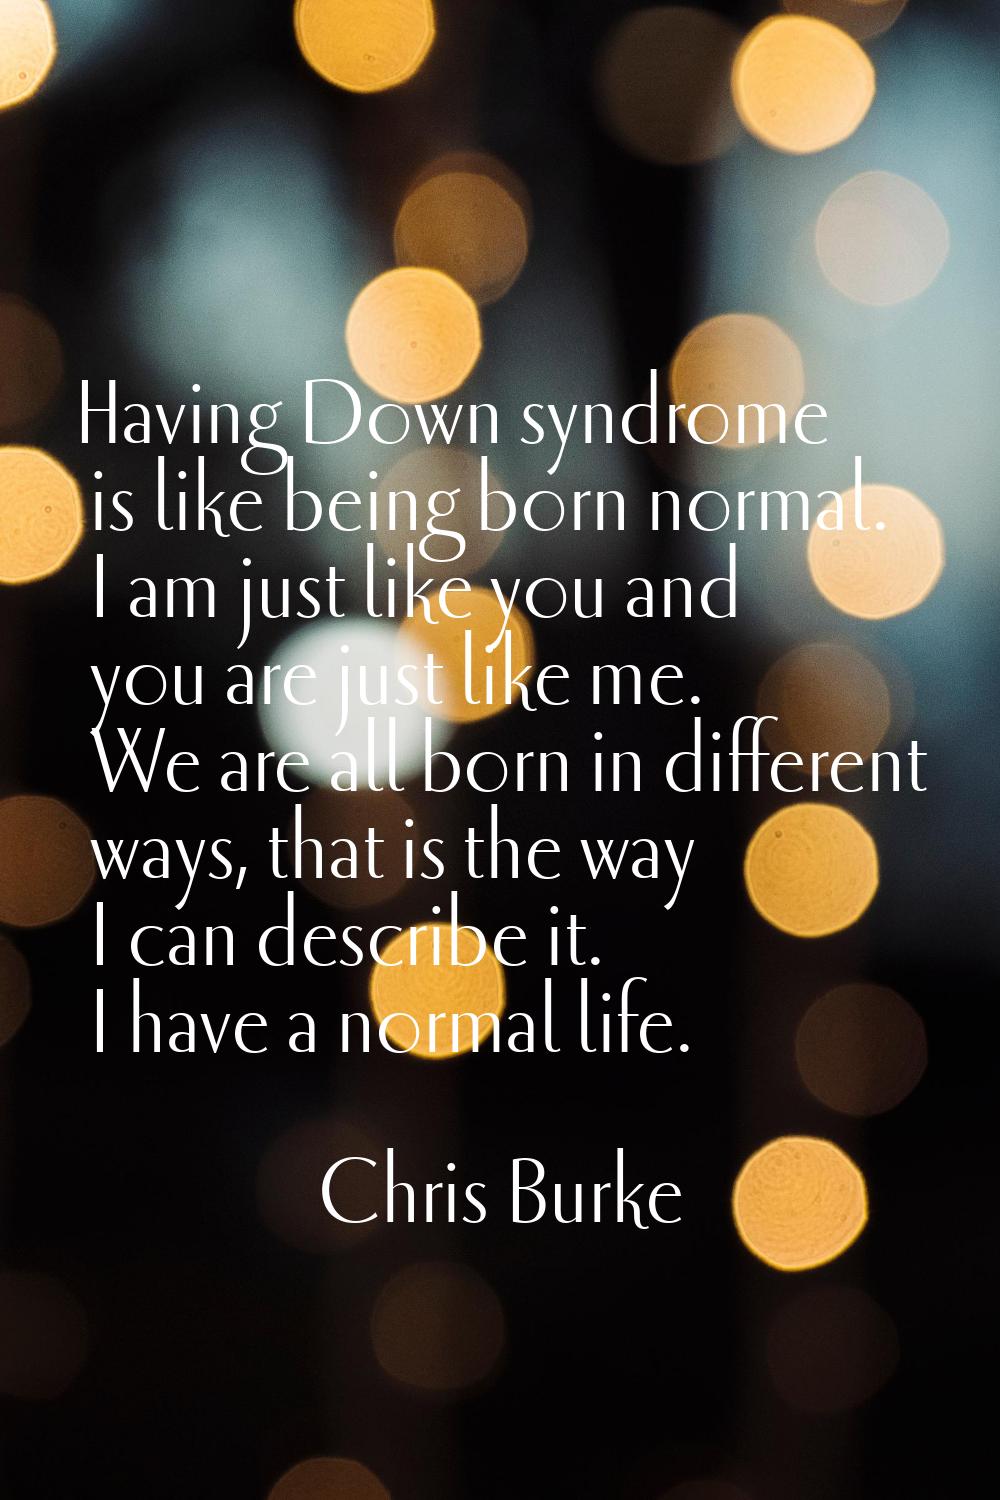 Having Down syndrome is like being born normal. I am just like you and you are just like me. We are